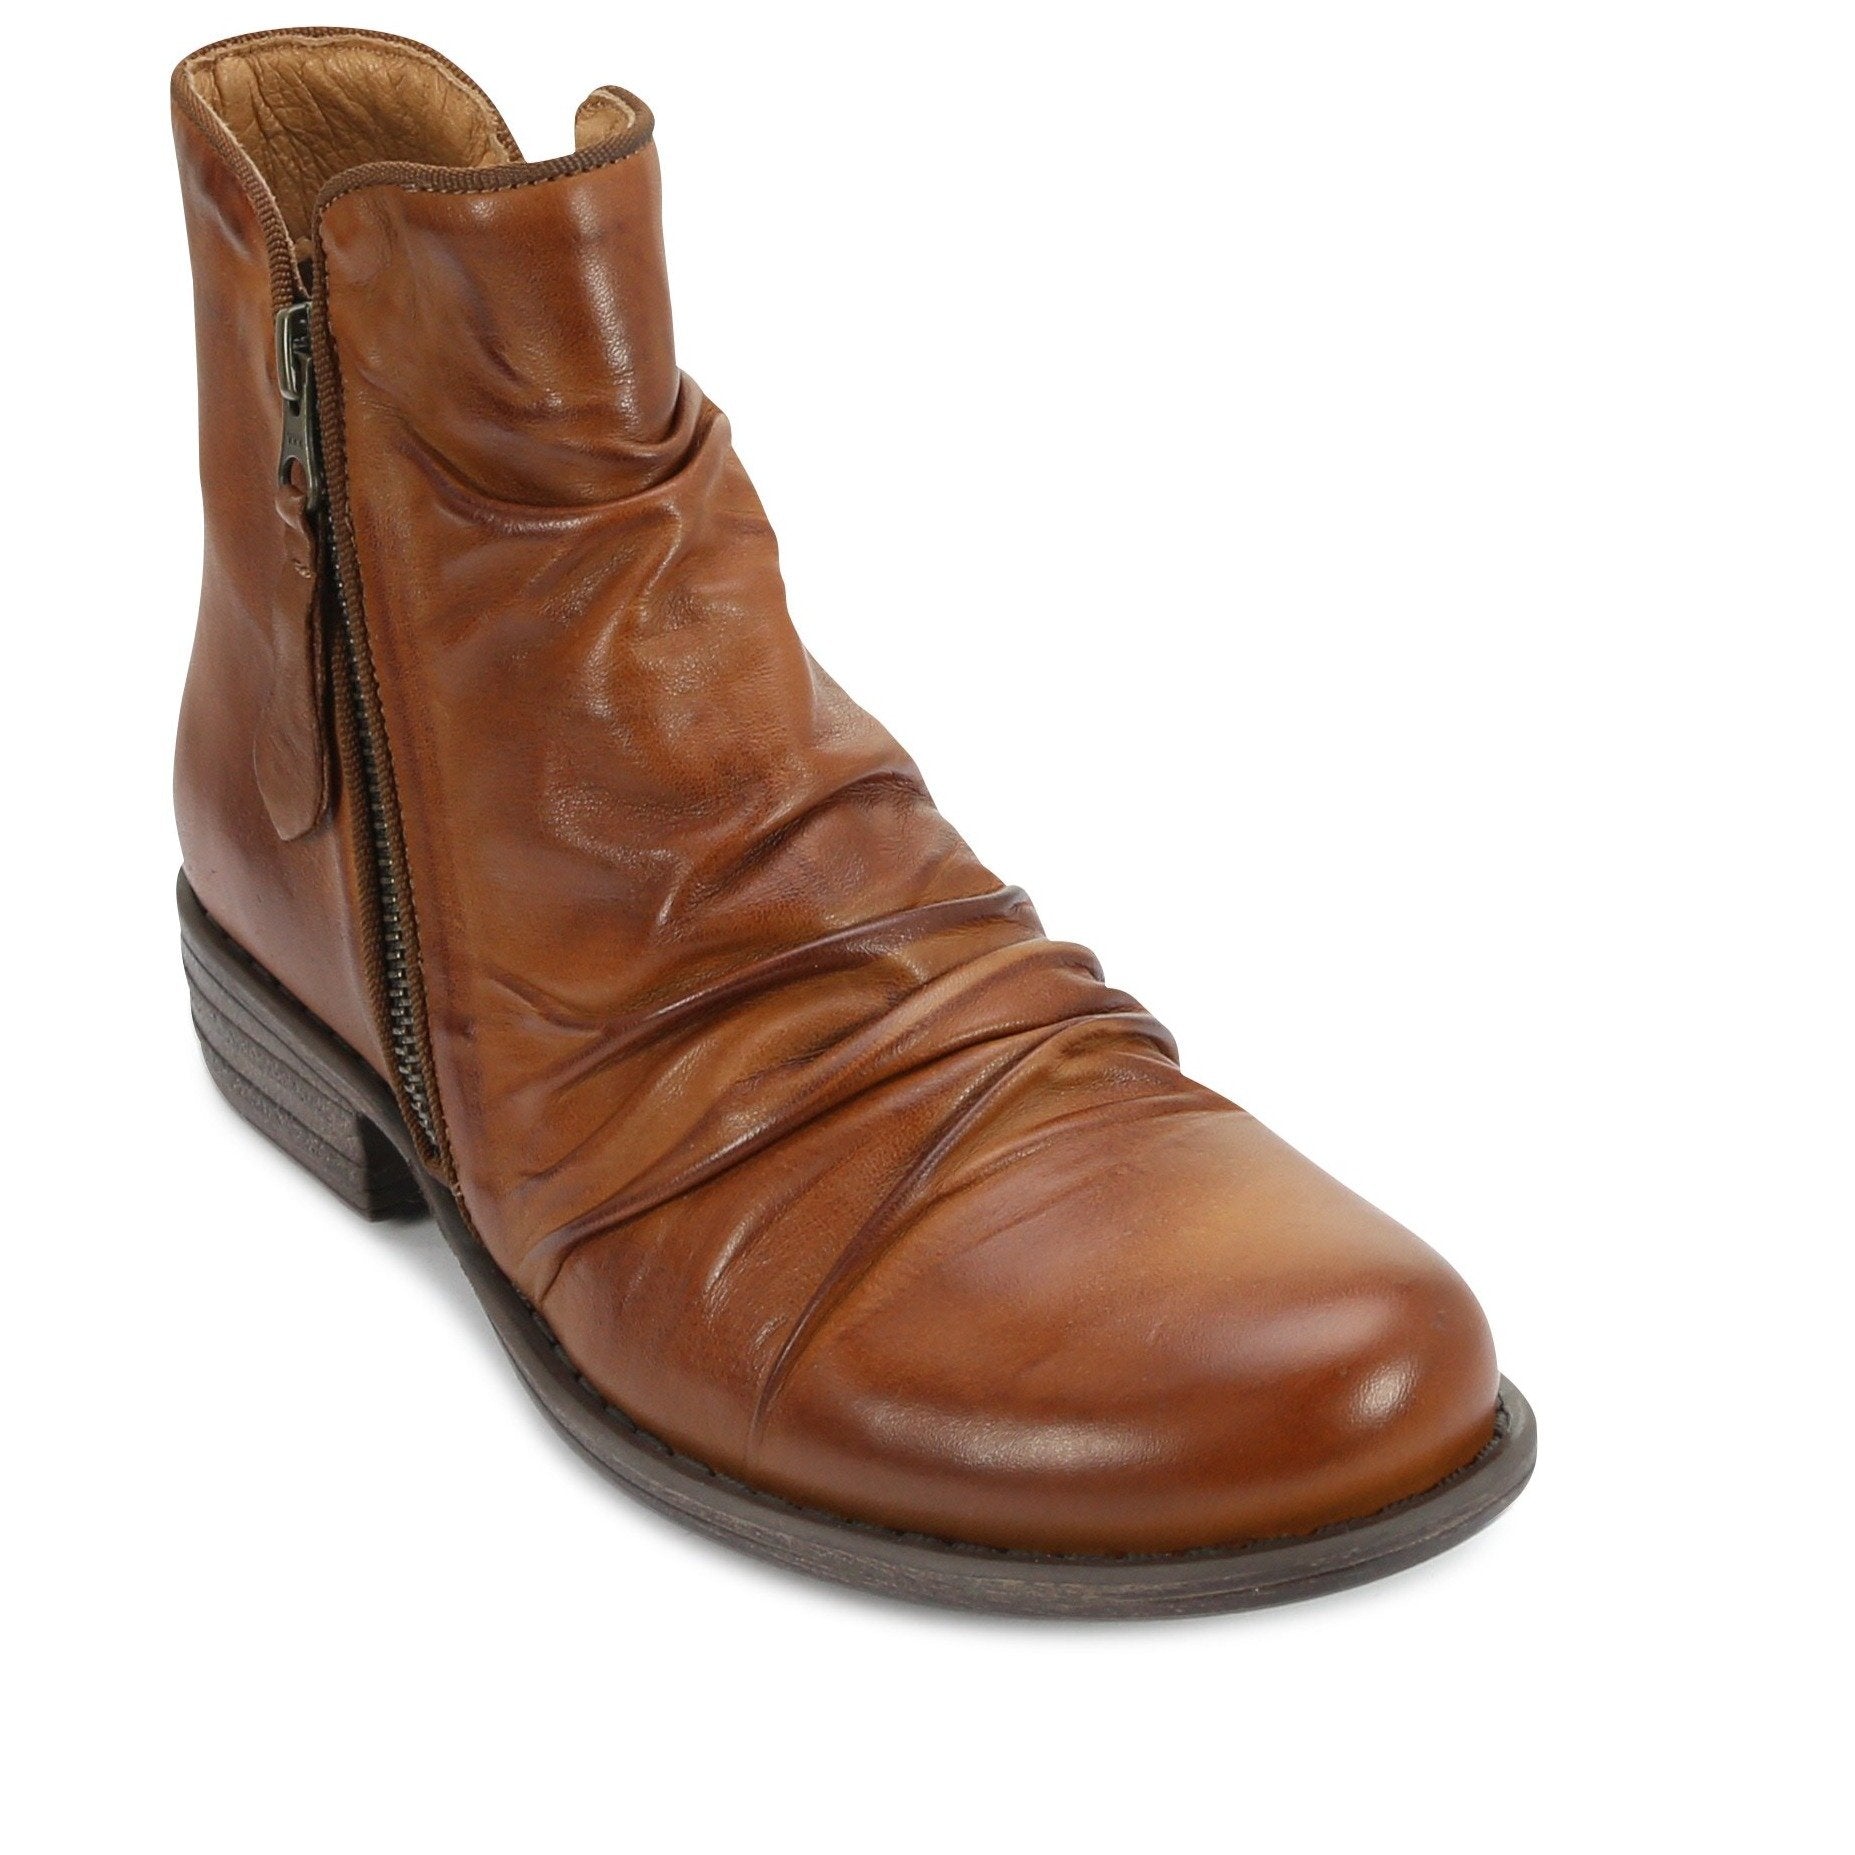 WILLET - EOS Footwear - Ankle Boots #color_Chestnut